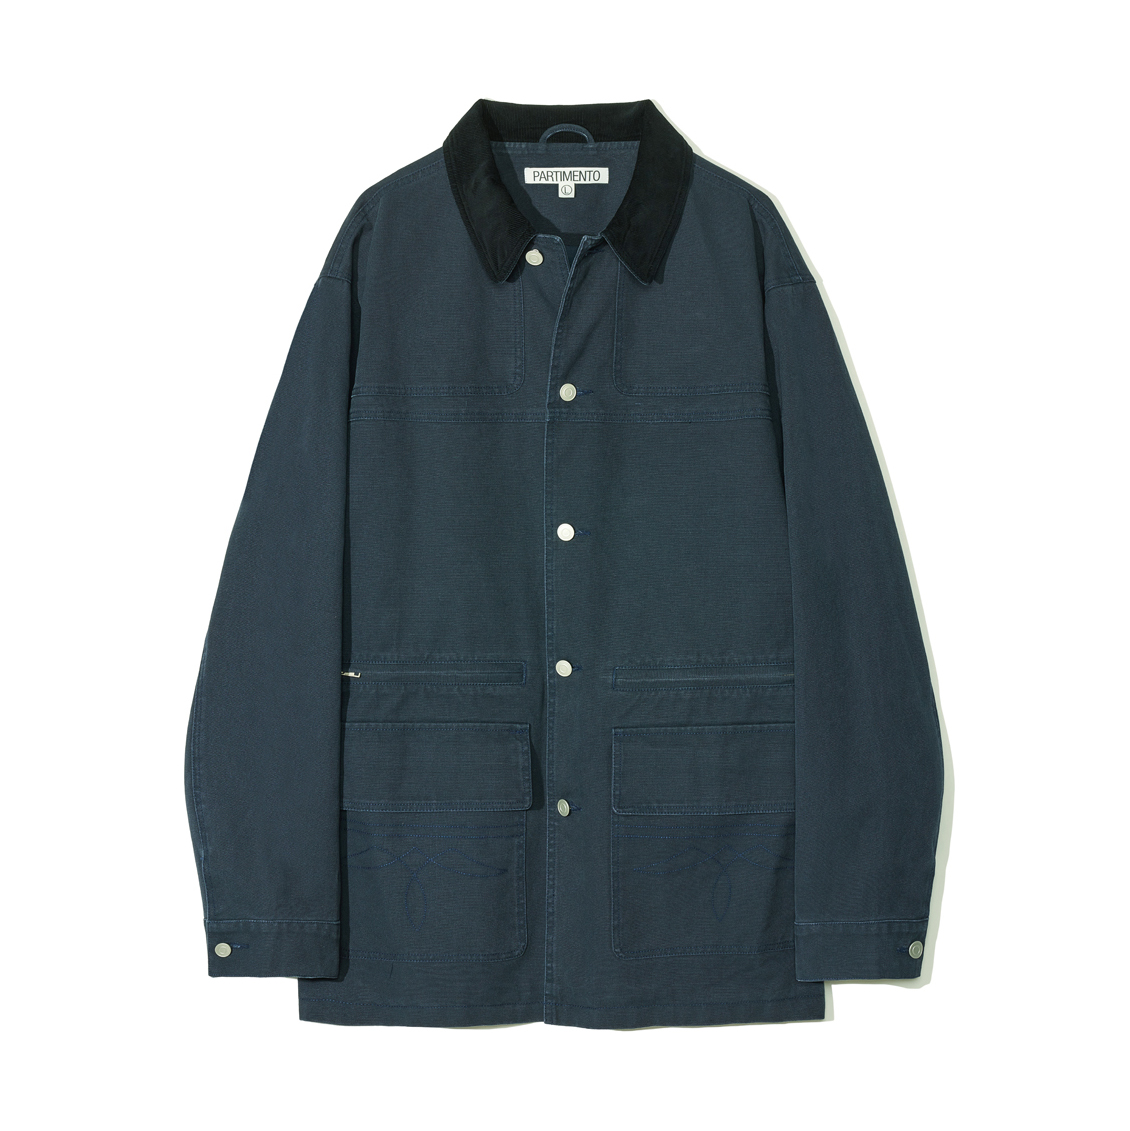 Partimento Western Chore Jacket in Navy